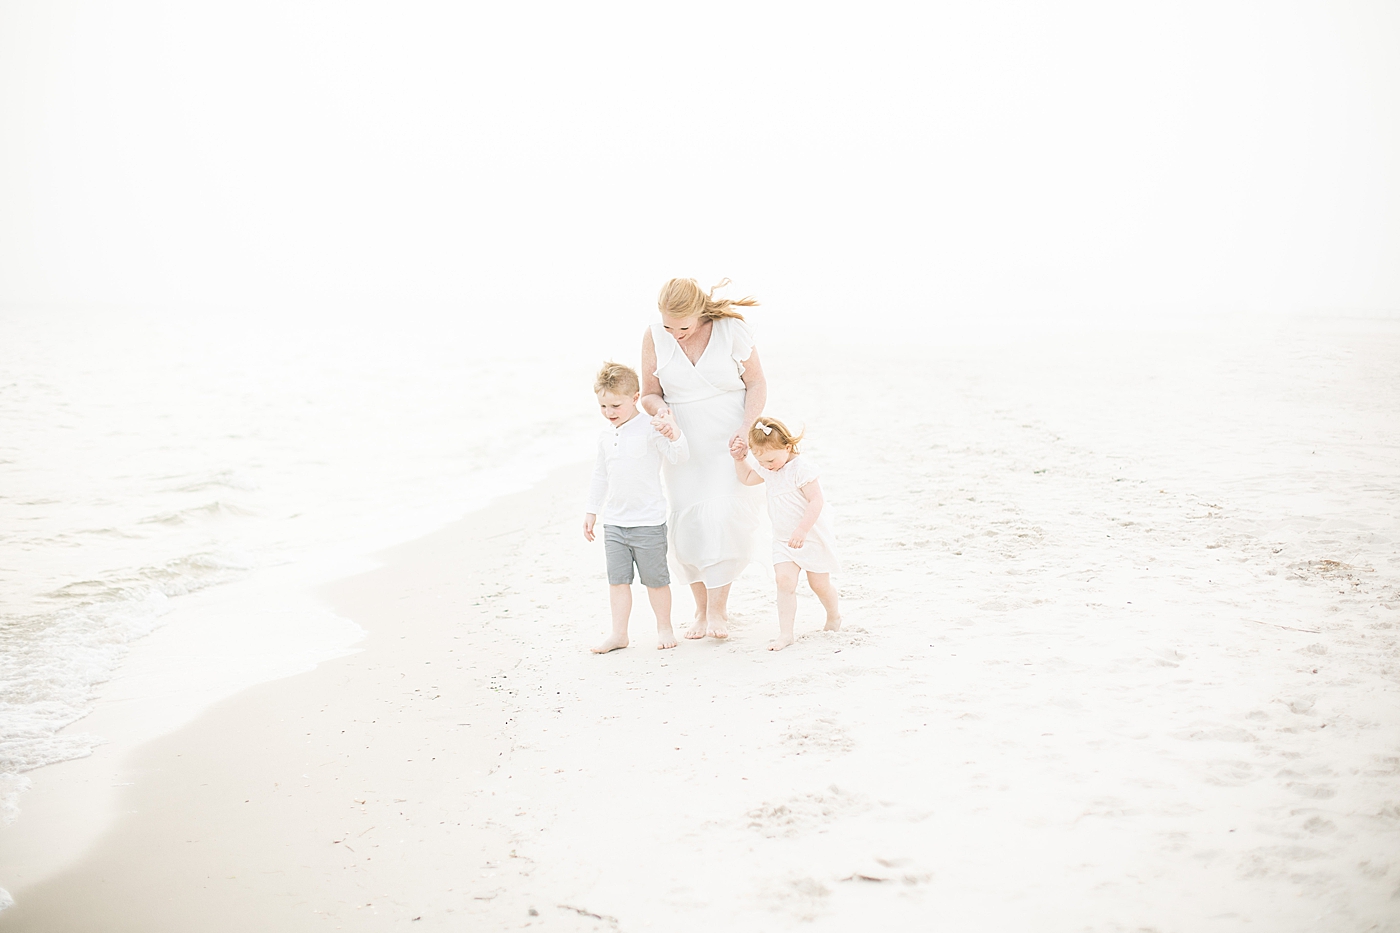 Mom walking with her two kids along the water on the beach. Photo by Little Sunshine Photography.